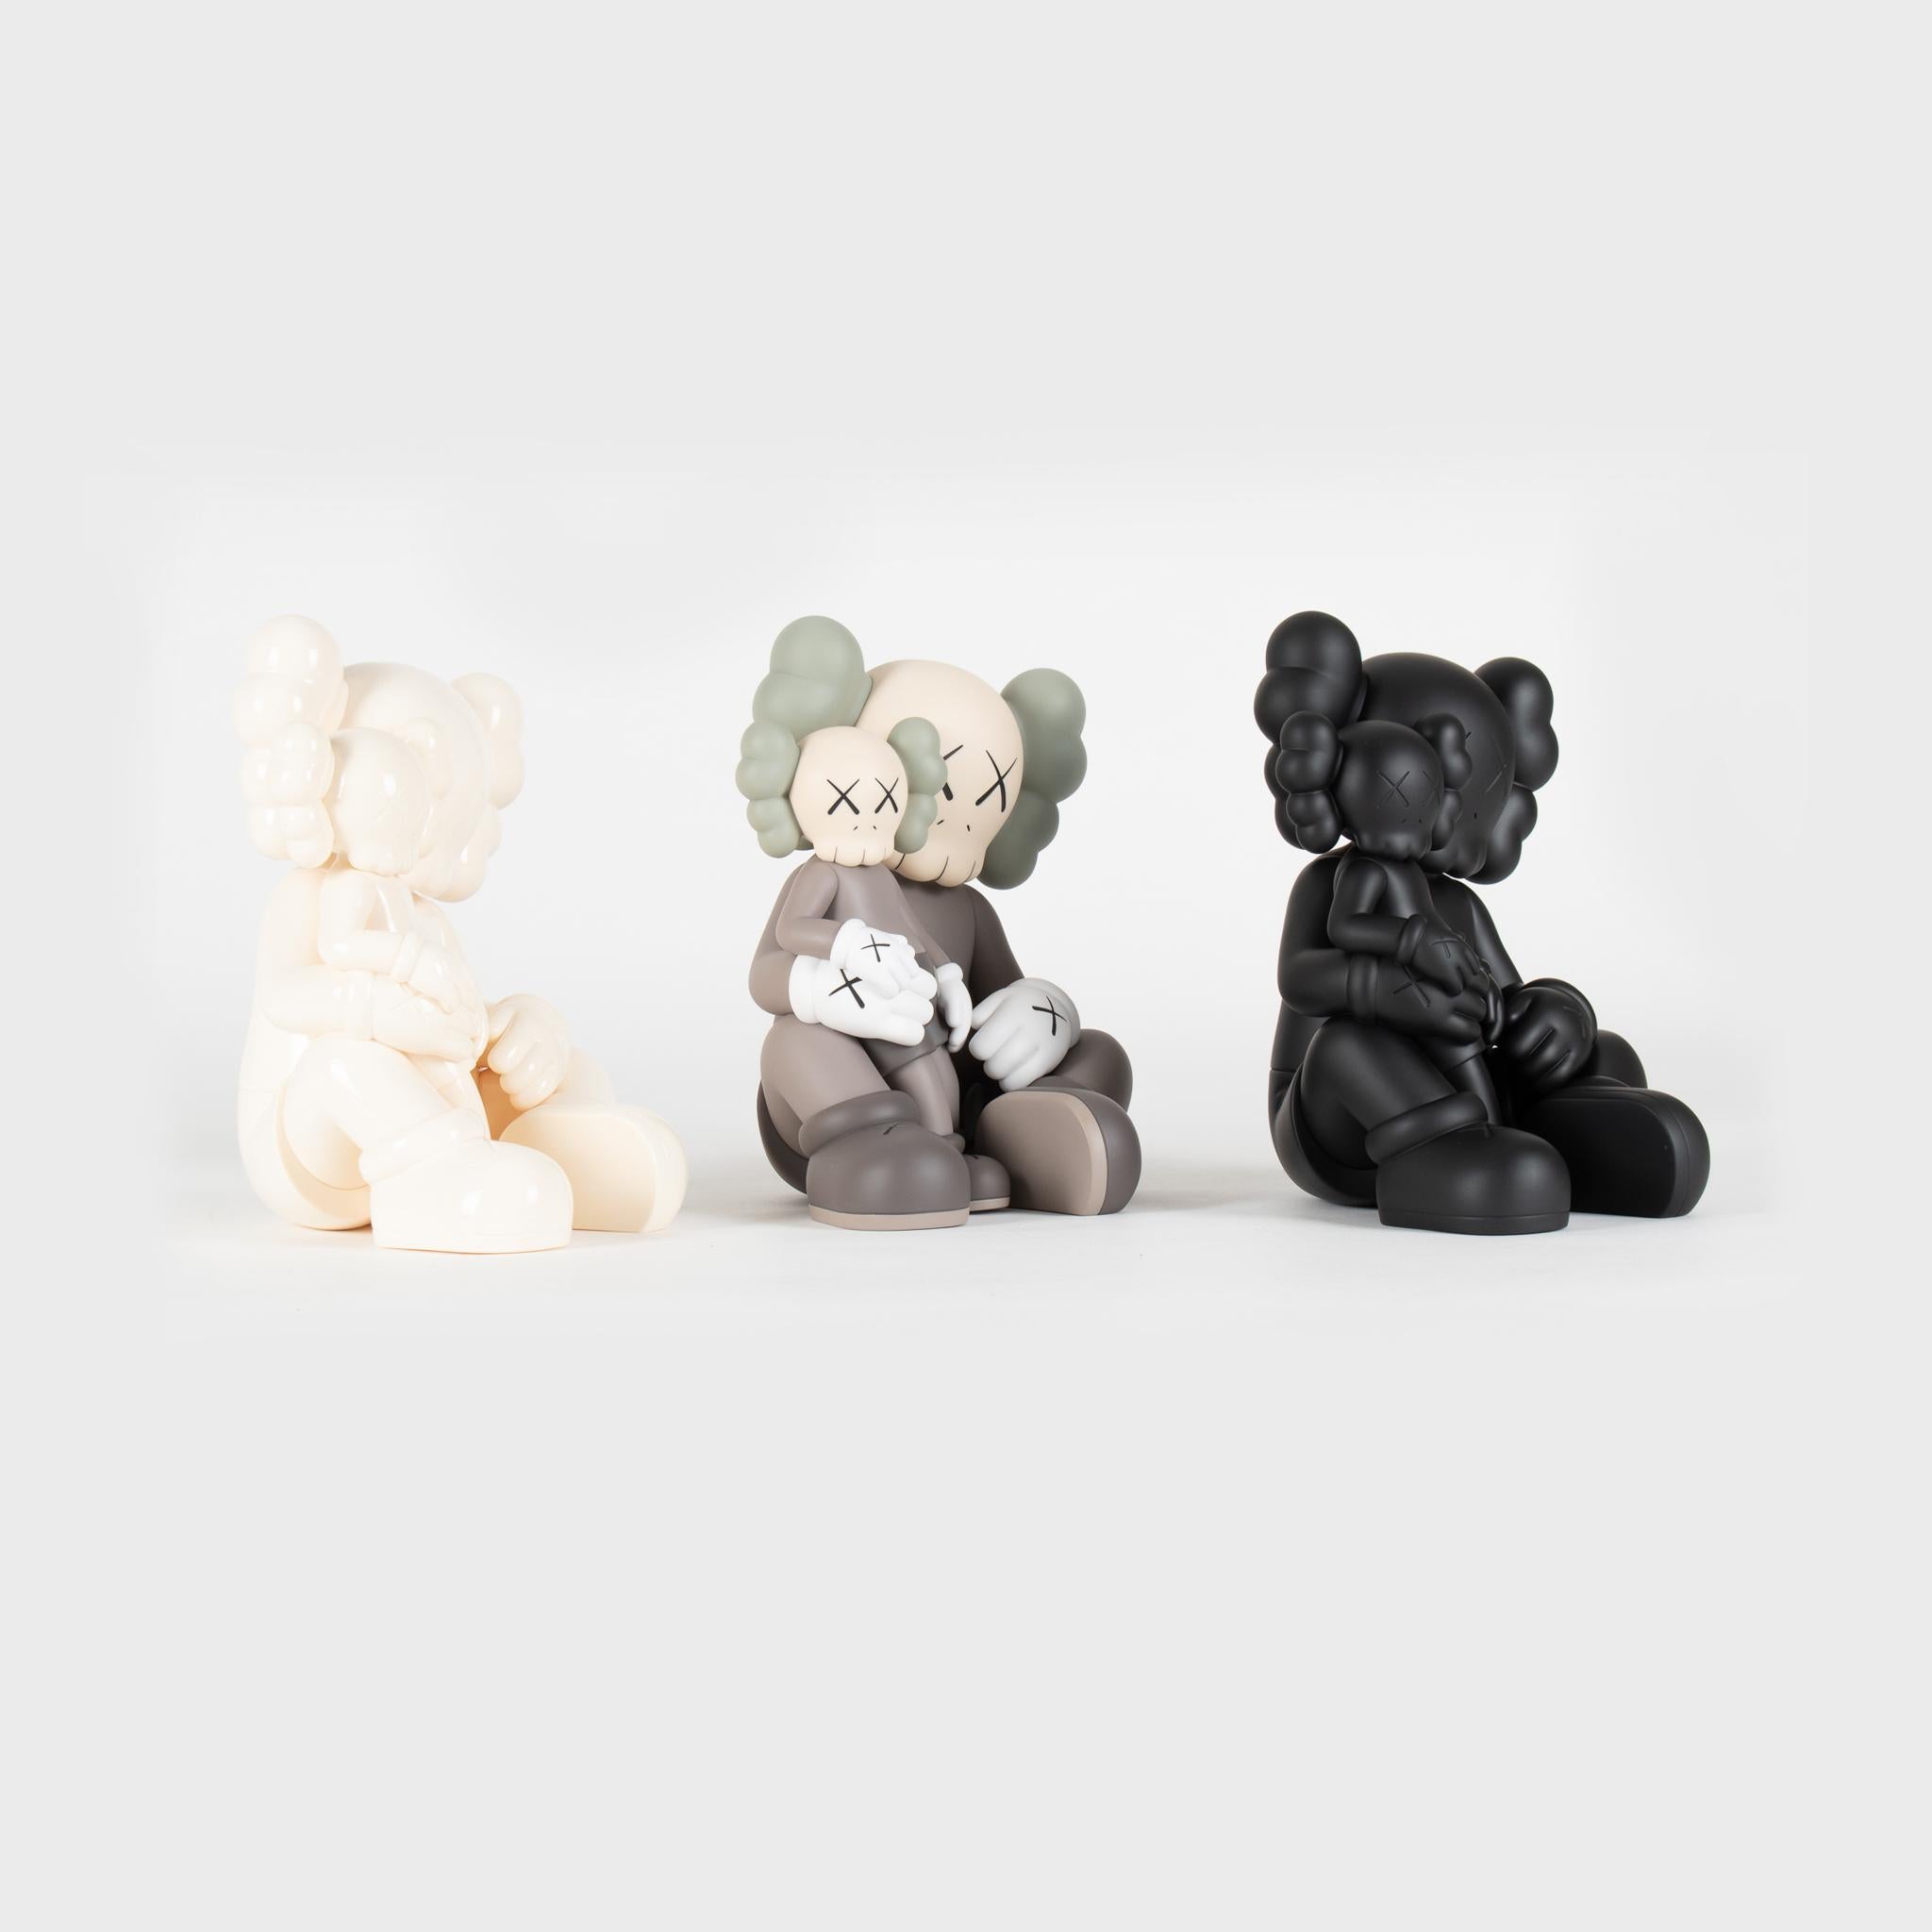 Holiday Changbai Mountain Figure (Black, Brown, Snowy White) - Sculpture by KAWS